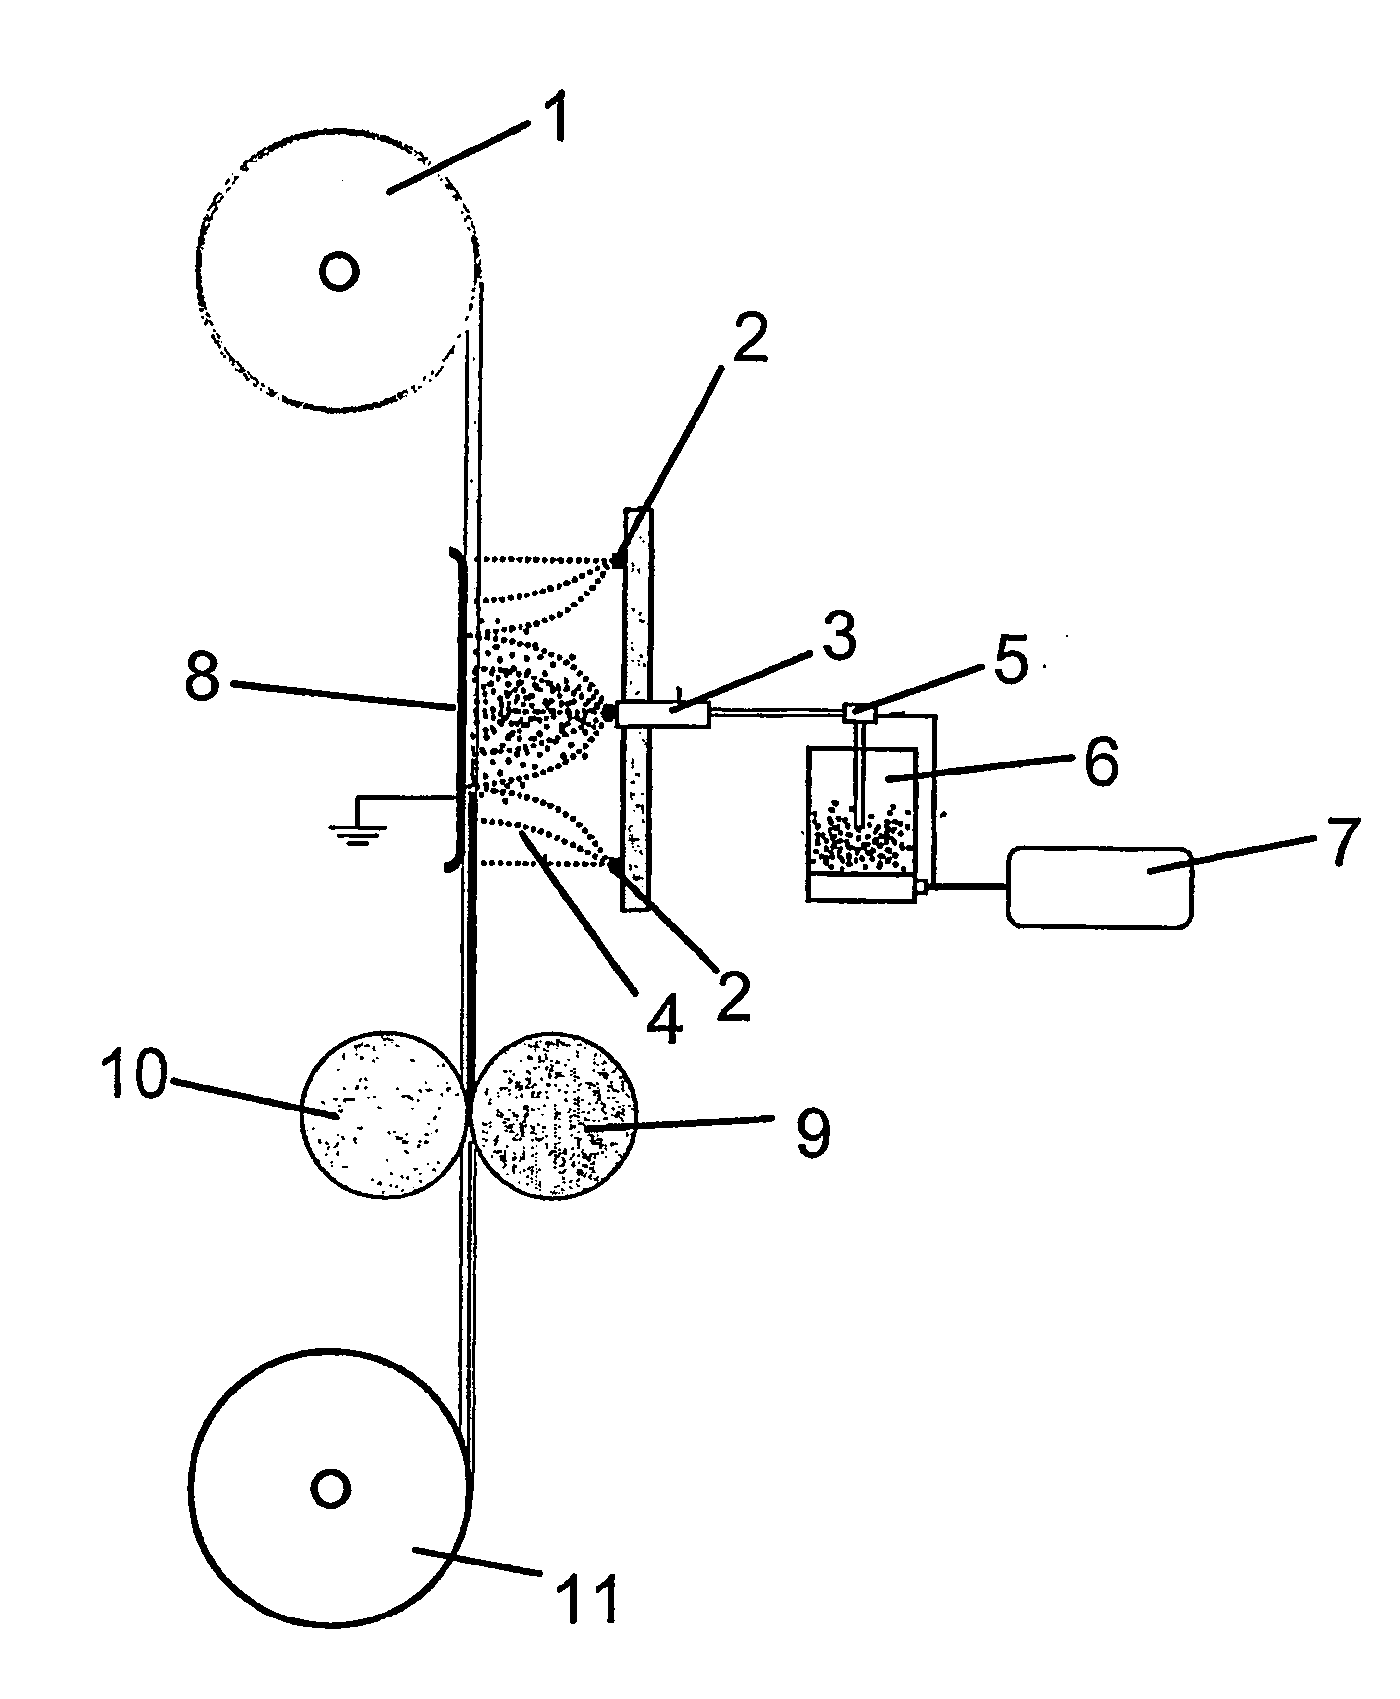 Method for forming a film, by using electrostatic forces